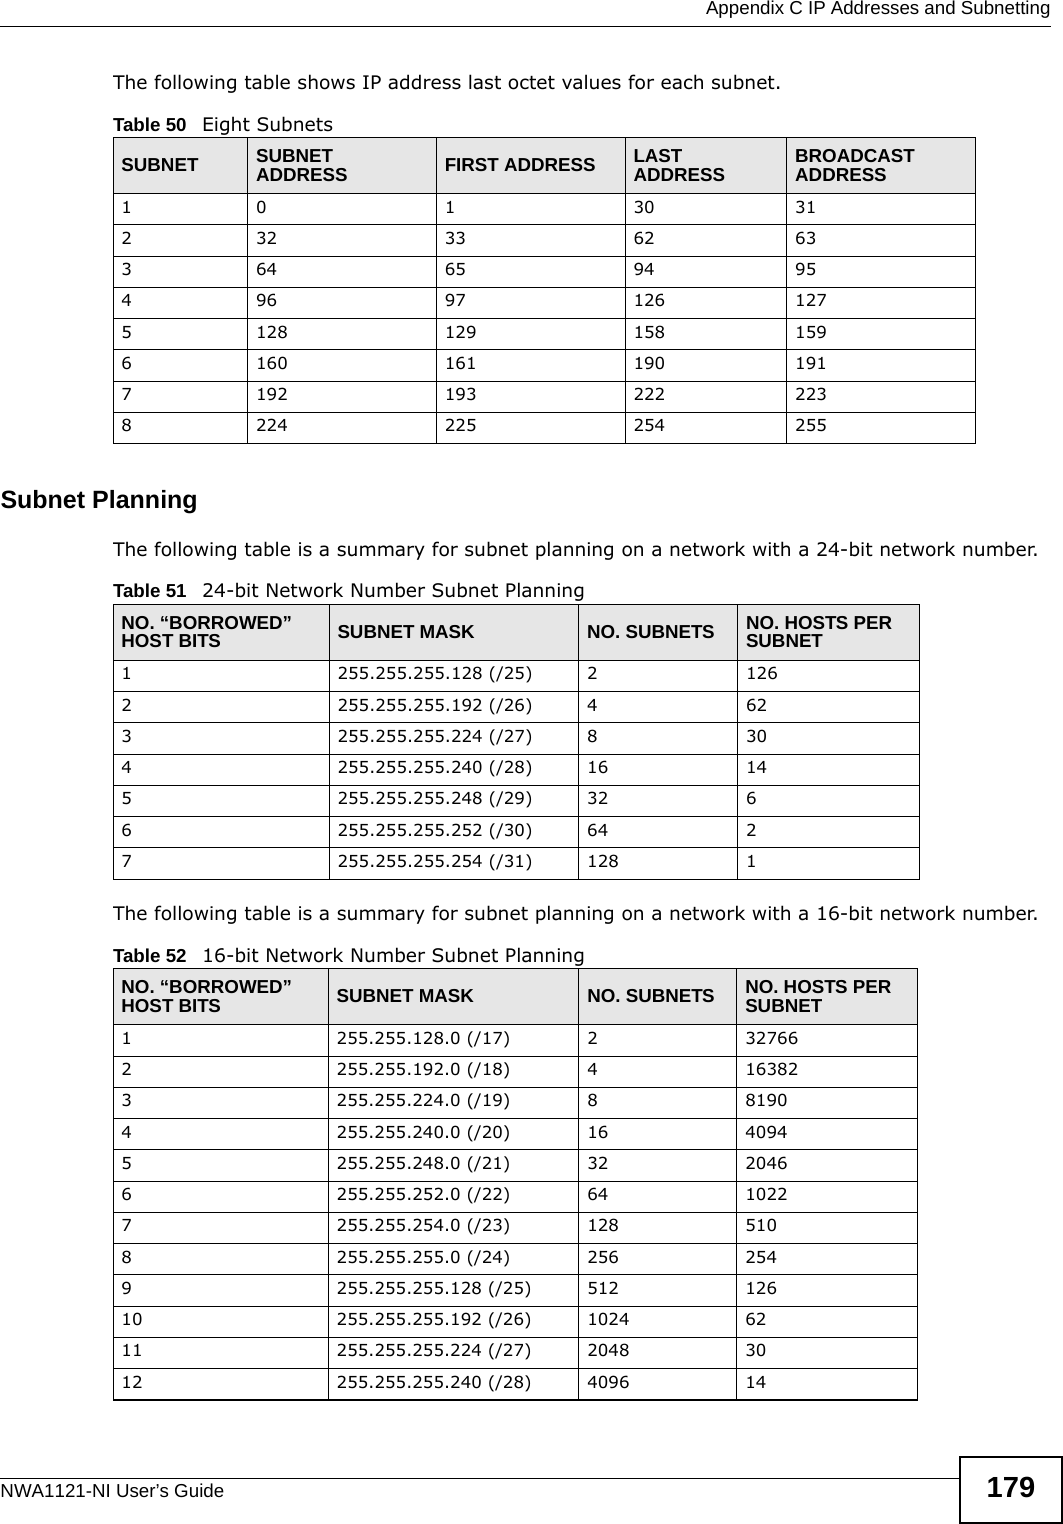  Appendix C IP Addresses and SubnettingNWA1121-NI User’s Guide 179The following table shows IP address last octet values for each subnet.Subnet PlanningThe following table is a summary for subnet planning on a network with a 24-bit network number.The following table is a summary for subnet planning on a network with a 16-bit network number. Table 50   Eight SubnetsSUBNET SUBNET ADDRESS FIRST ADDRESS LAST ADDRESS BROADCAST ADDRESS1 0 1 30 31232 33 62 63364 65 94 95496 97 126 1275128 129 158 1596160 161 190 1917192 193 222 2238224 225 254 255Table 51   24-bit Network Number Subnet PlanningNO. “BORROWED” HOST BITS SUBNET MASK NO. SUBNETS NO. HOSTS PER SUBNET1255.255.255.128 (/25) 21262255.255.255.192 (/26) 4623255.255.255.224 (/27) 8304255.255.255.240 (/28) 16 145255.255.255.248 (/29) 32 66255.255.255.252 (/30) 64 27255.255.255.254 (/31) 128 1Table 52   16-bit Network Number Subnet PlanningNO. “BORROWED” HOST BITS SUBNET MASK NO. SUBNETS NO. HOSTS PER SUBNET1255.255.128.0 (/17) 2327662255.255.192.0 (/18) 4163823255.255.224.0 (/19) 881904255.255.240.0 (/20) 16 40945255.255.248.0 (/21) 32 20466255.255.252.0 (/22) 64 10227255.255.254.0 (/23) 128 5108255.255.255.0 (/24) 256 2549255.255.255.128 (/25) 512 12610 255.255.255.192 (/26) 1024 6211 255.255.255.224 (/27) 2048 3012 255.255.255.240 (/28) 4096 14